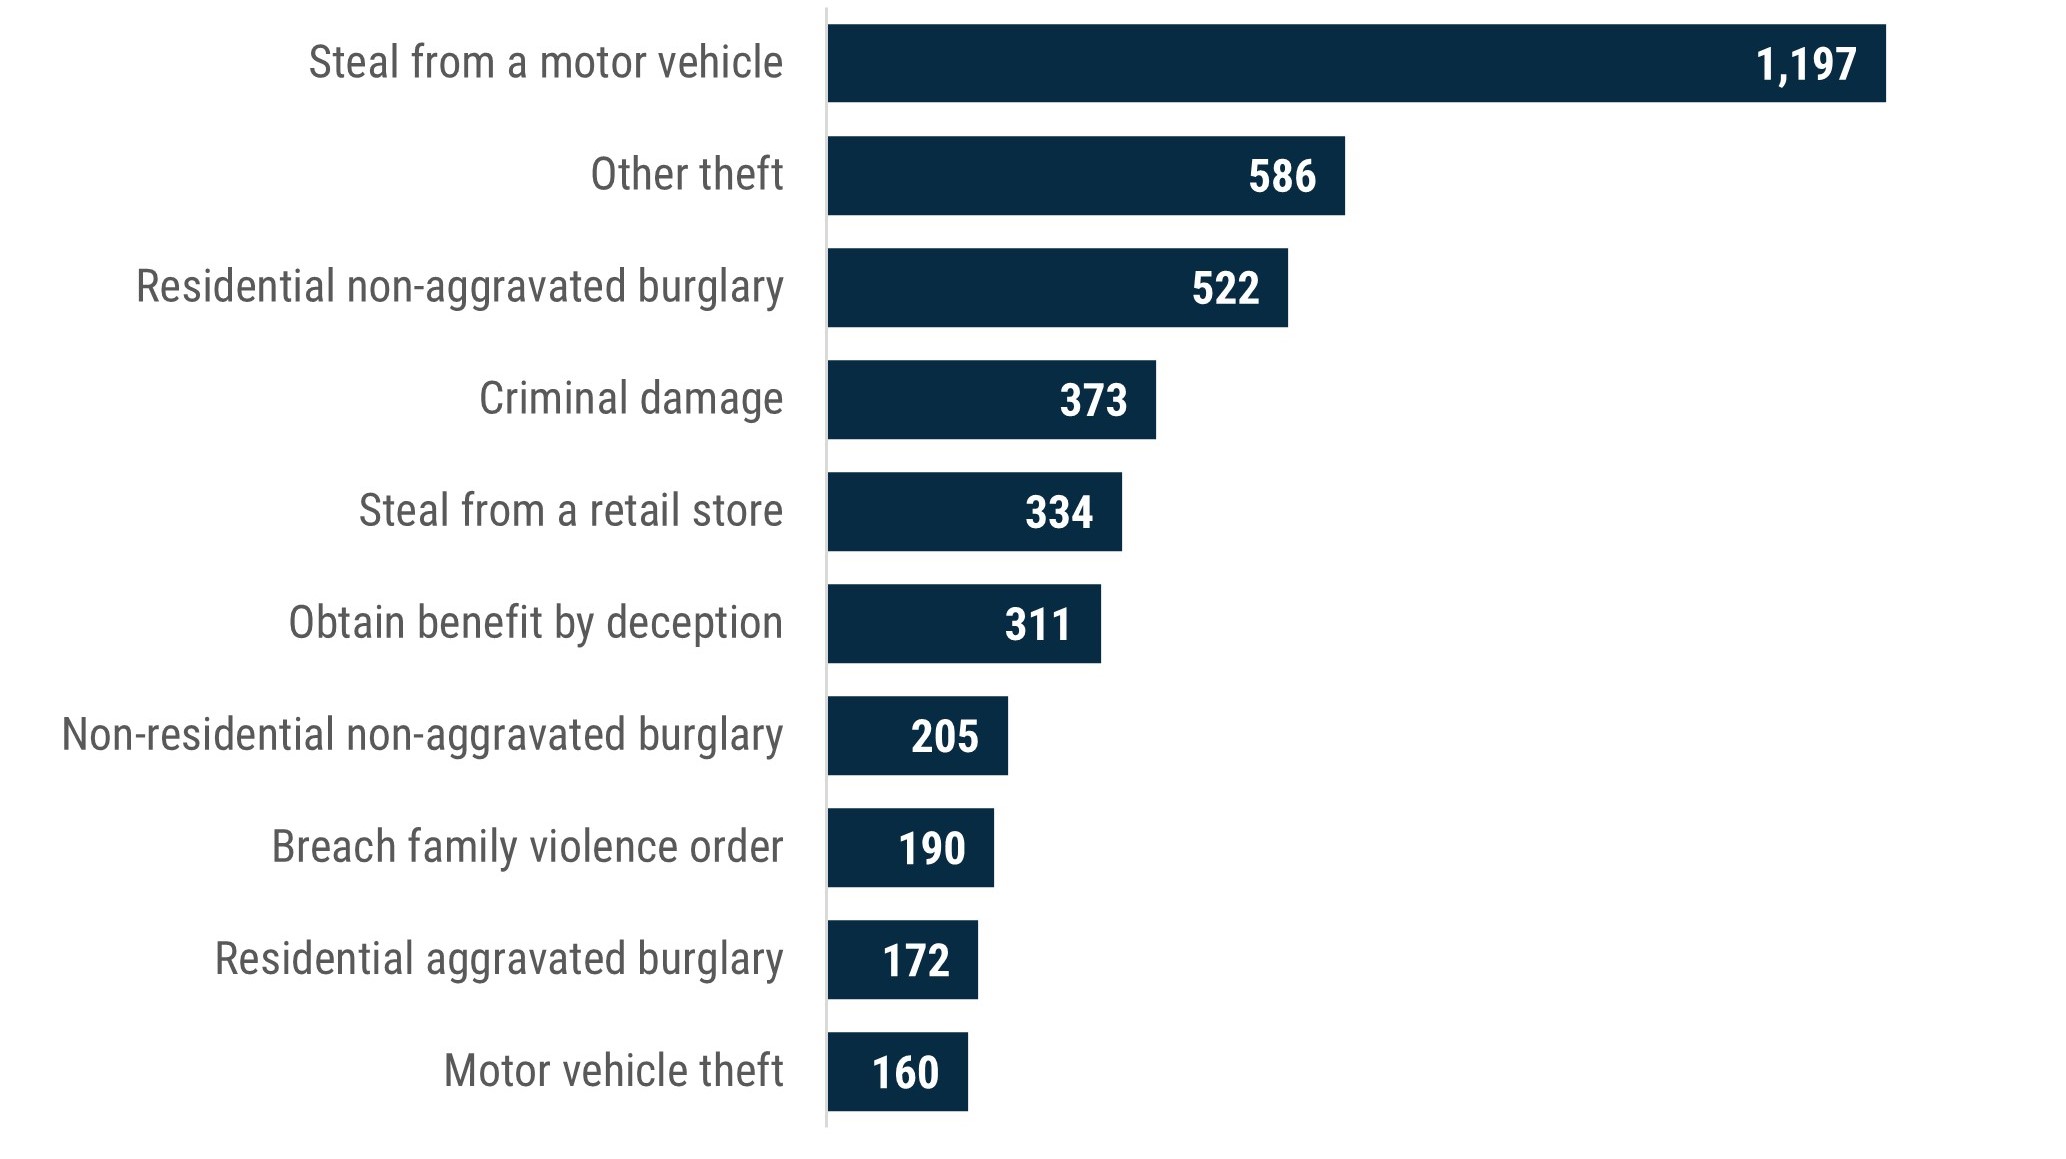 Bar chart which shows the top 10 most frequently recorded offence subgroups for criminal incidents recorded in Boroondara during 2022. The most frequent was stealing from a motor vehicle, with 1197 incidents. Next was "other theft" and residential non-aggravated burglary, with 586 and 522 incidents respectively. Next were criminal damage, steal from a retail store and obtain benefit by deception with 373, 334 and 311 incidents respectively. There were 205 non-residential non-aggravated burglaries and all ot